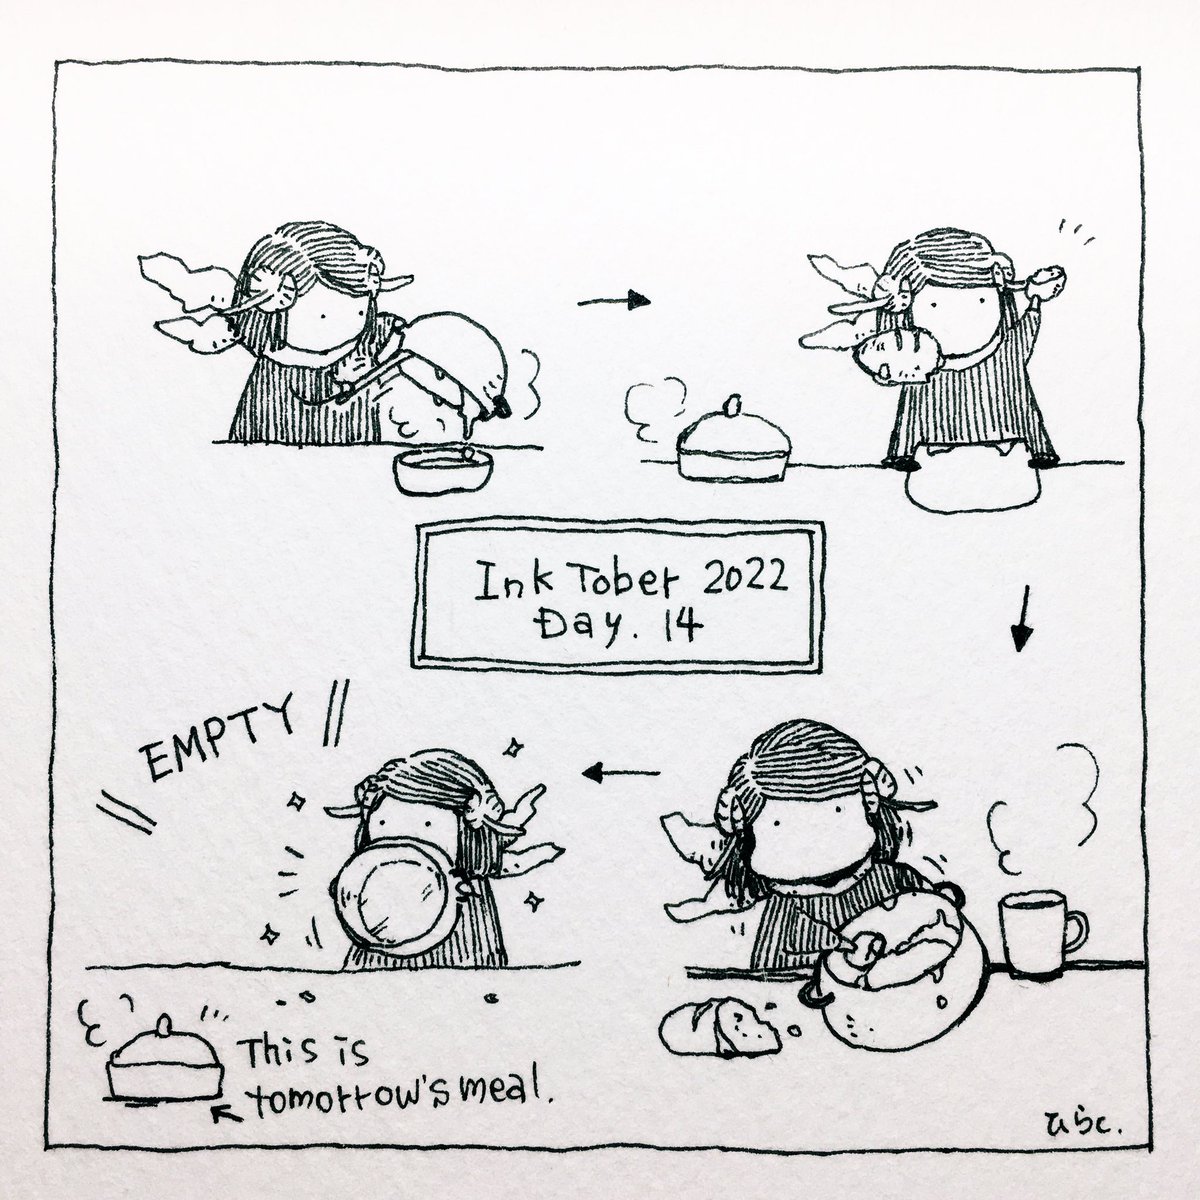 10/14: EMPTY
縁について水分の飛んだところが特においしい。
It's especially delicious when it sticks to the edges and loses moisture.

 #inktober2022  #inktober2022day14  #Pavot  #ペン画 